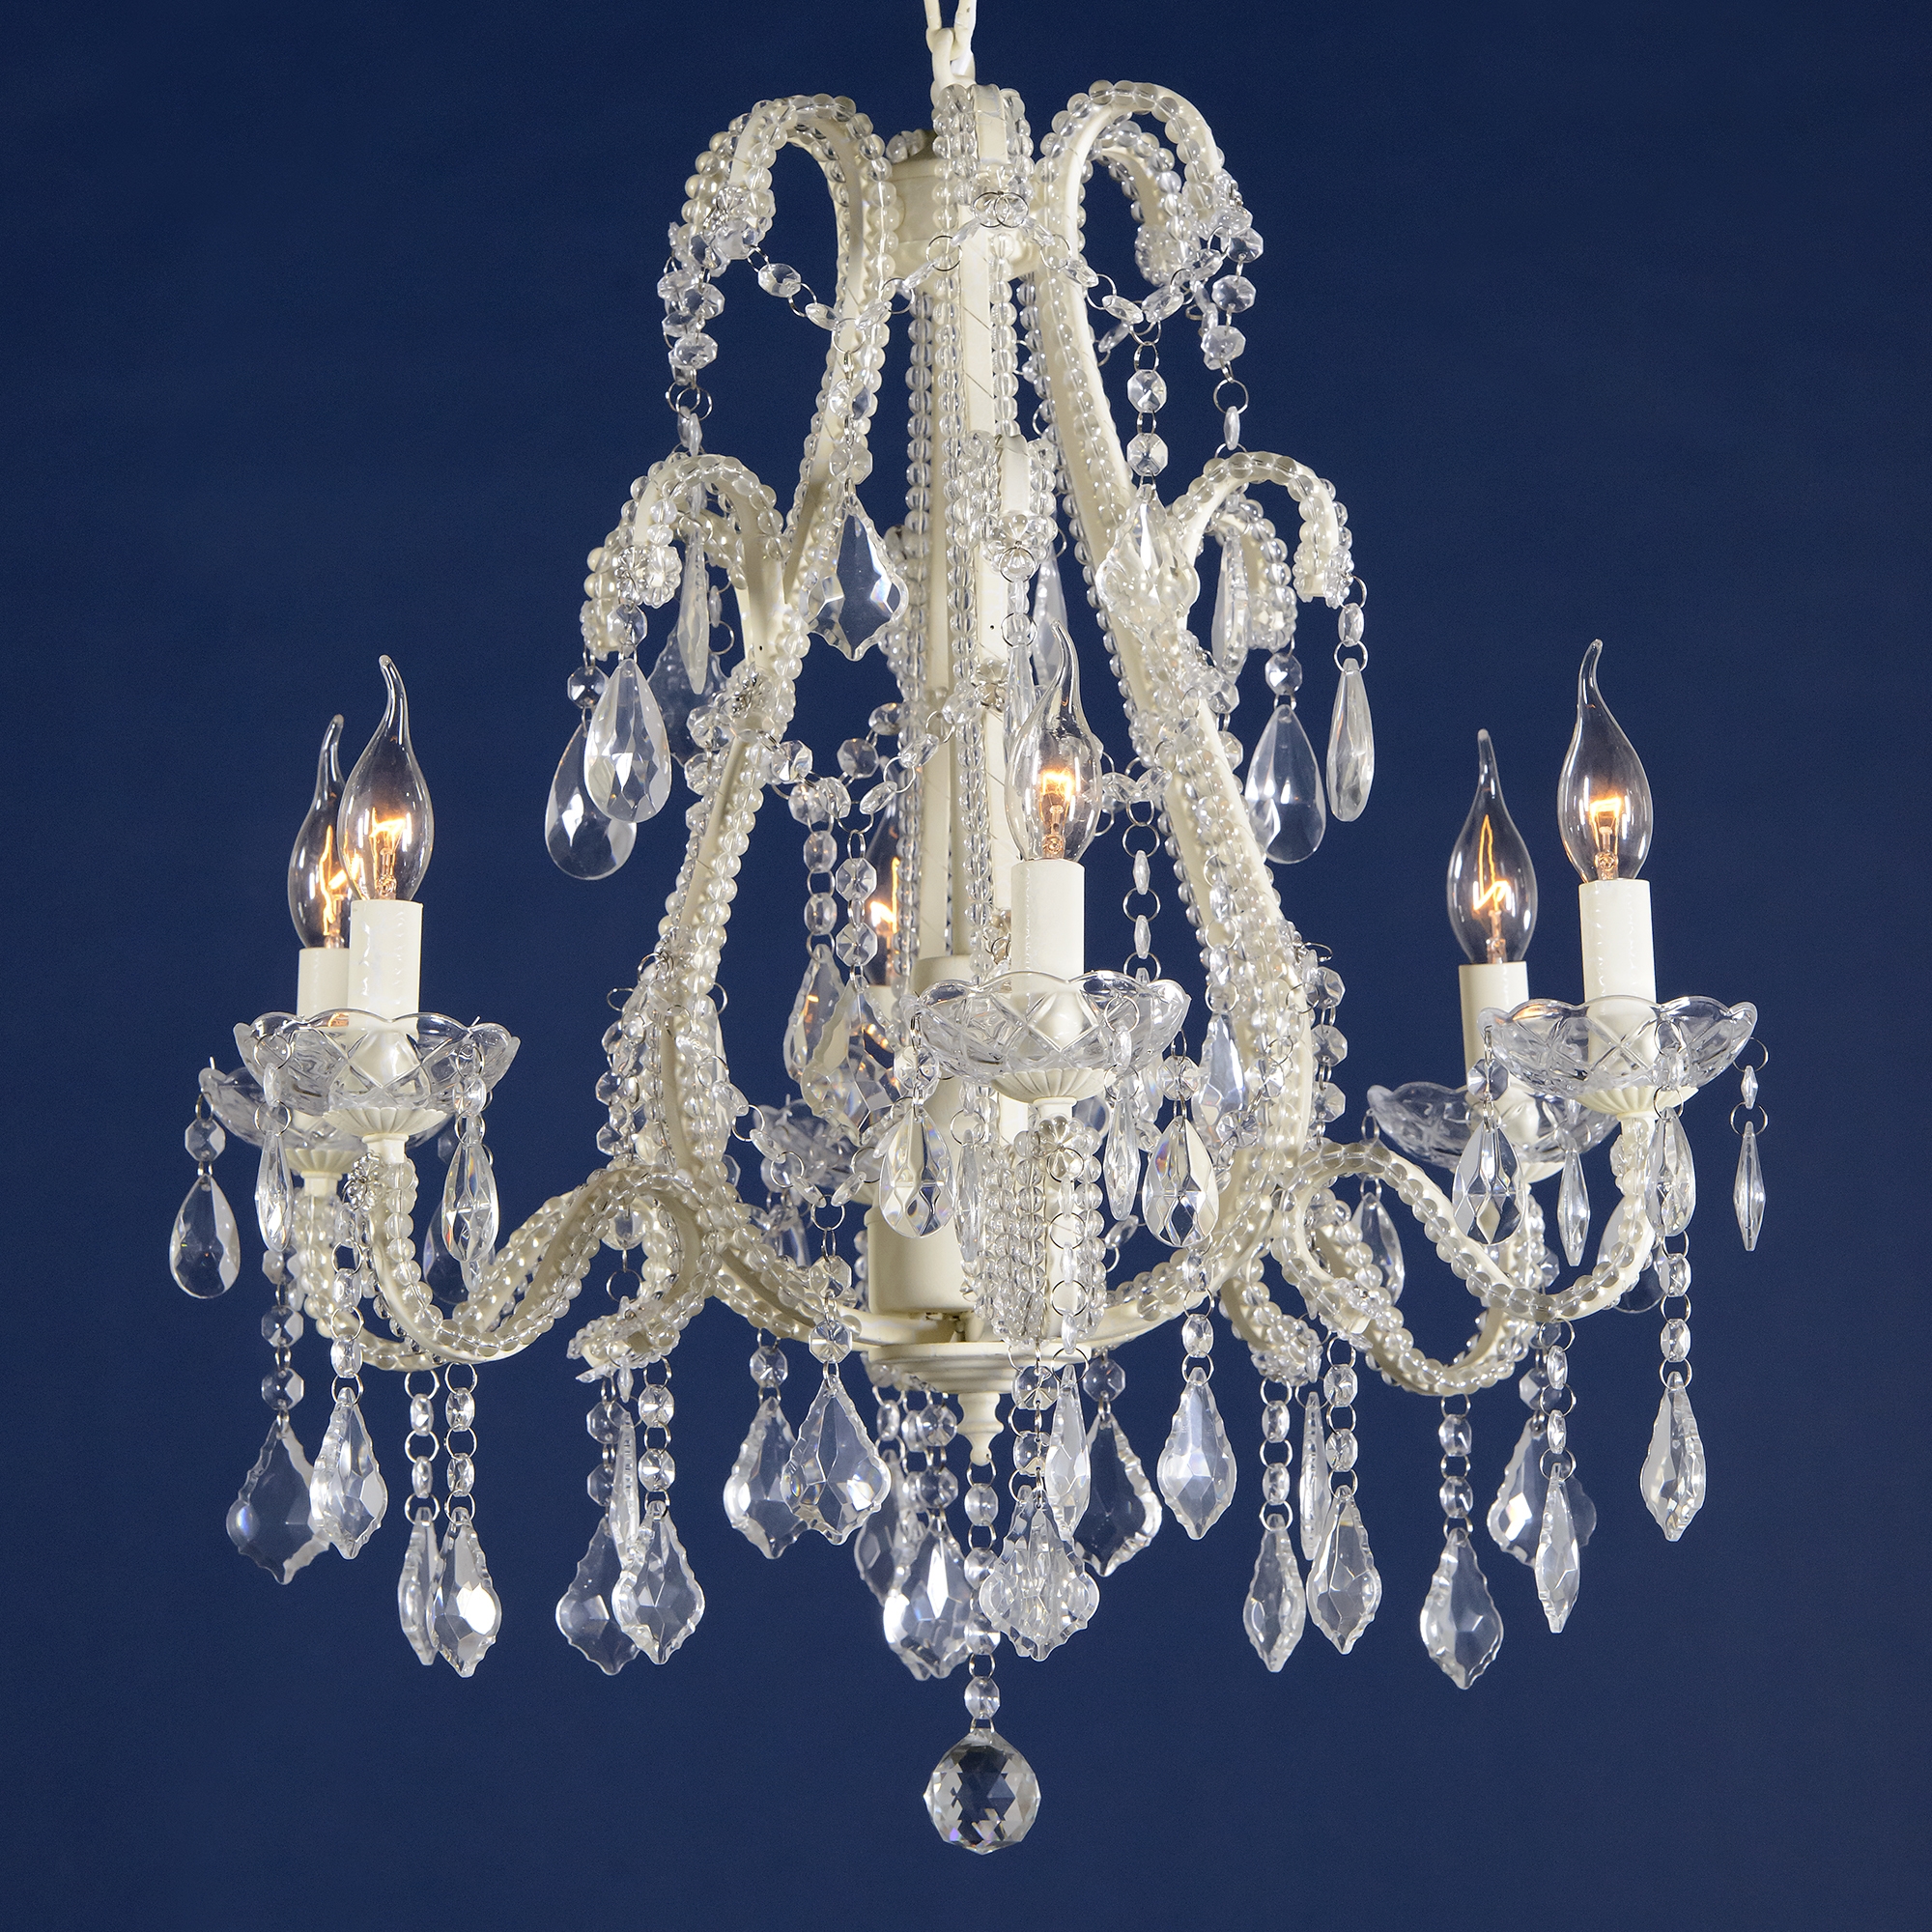 Marie Therese 6 Light Chandelier - Cream Crack